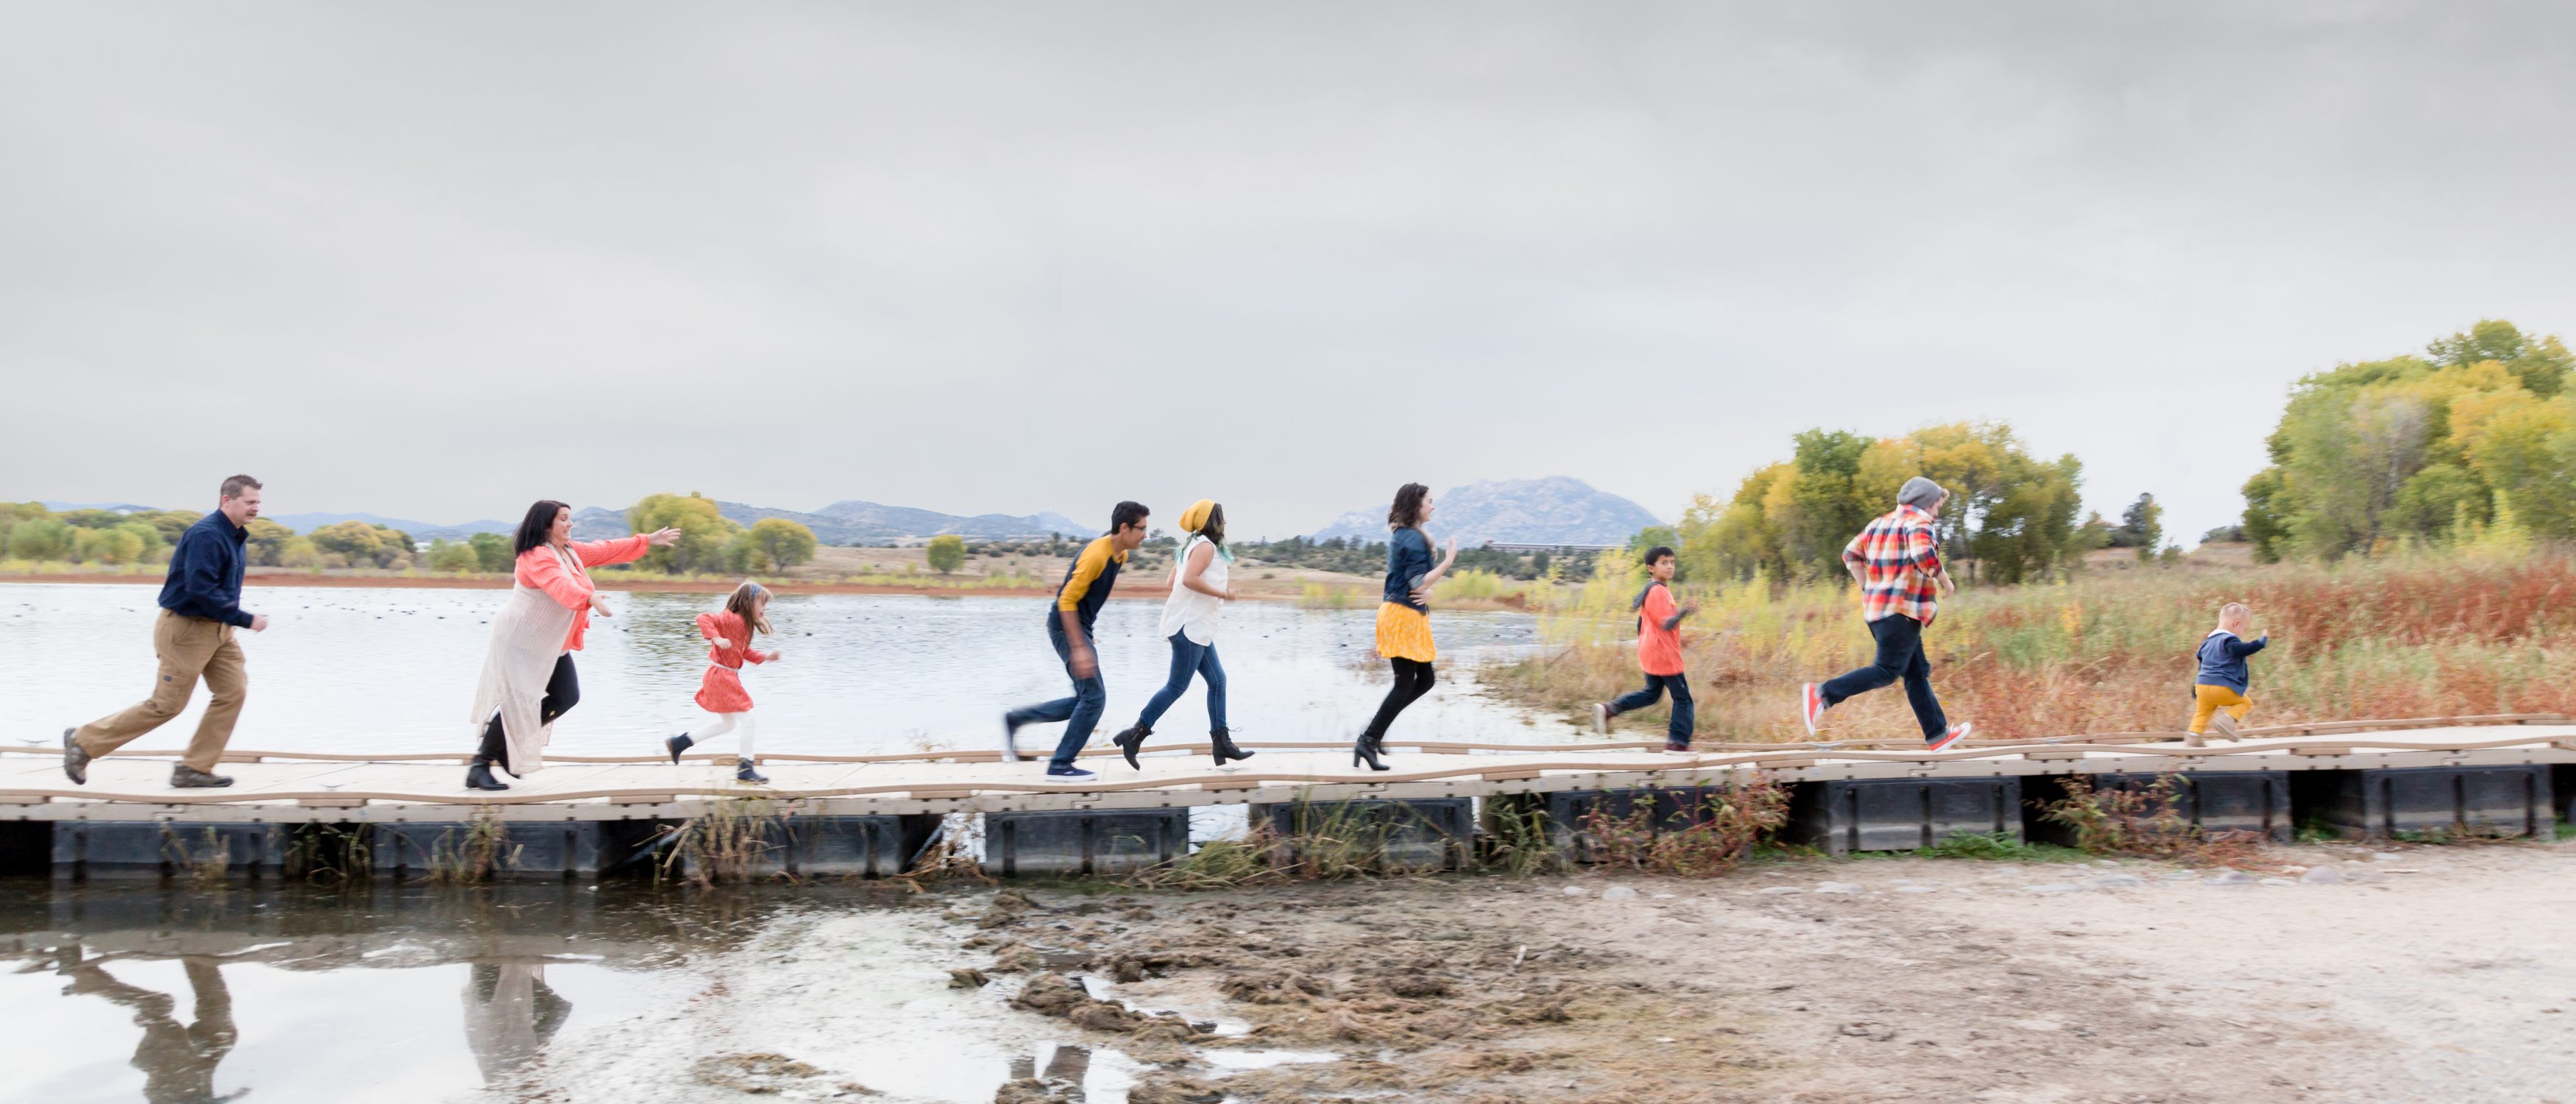 A group of people walking on a dock near a lake.